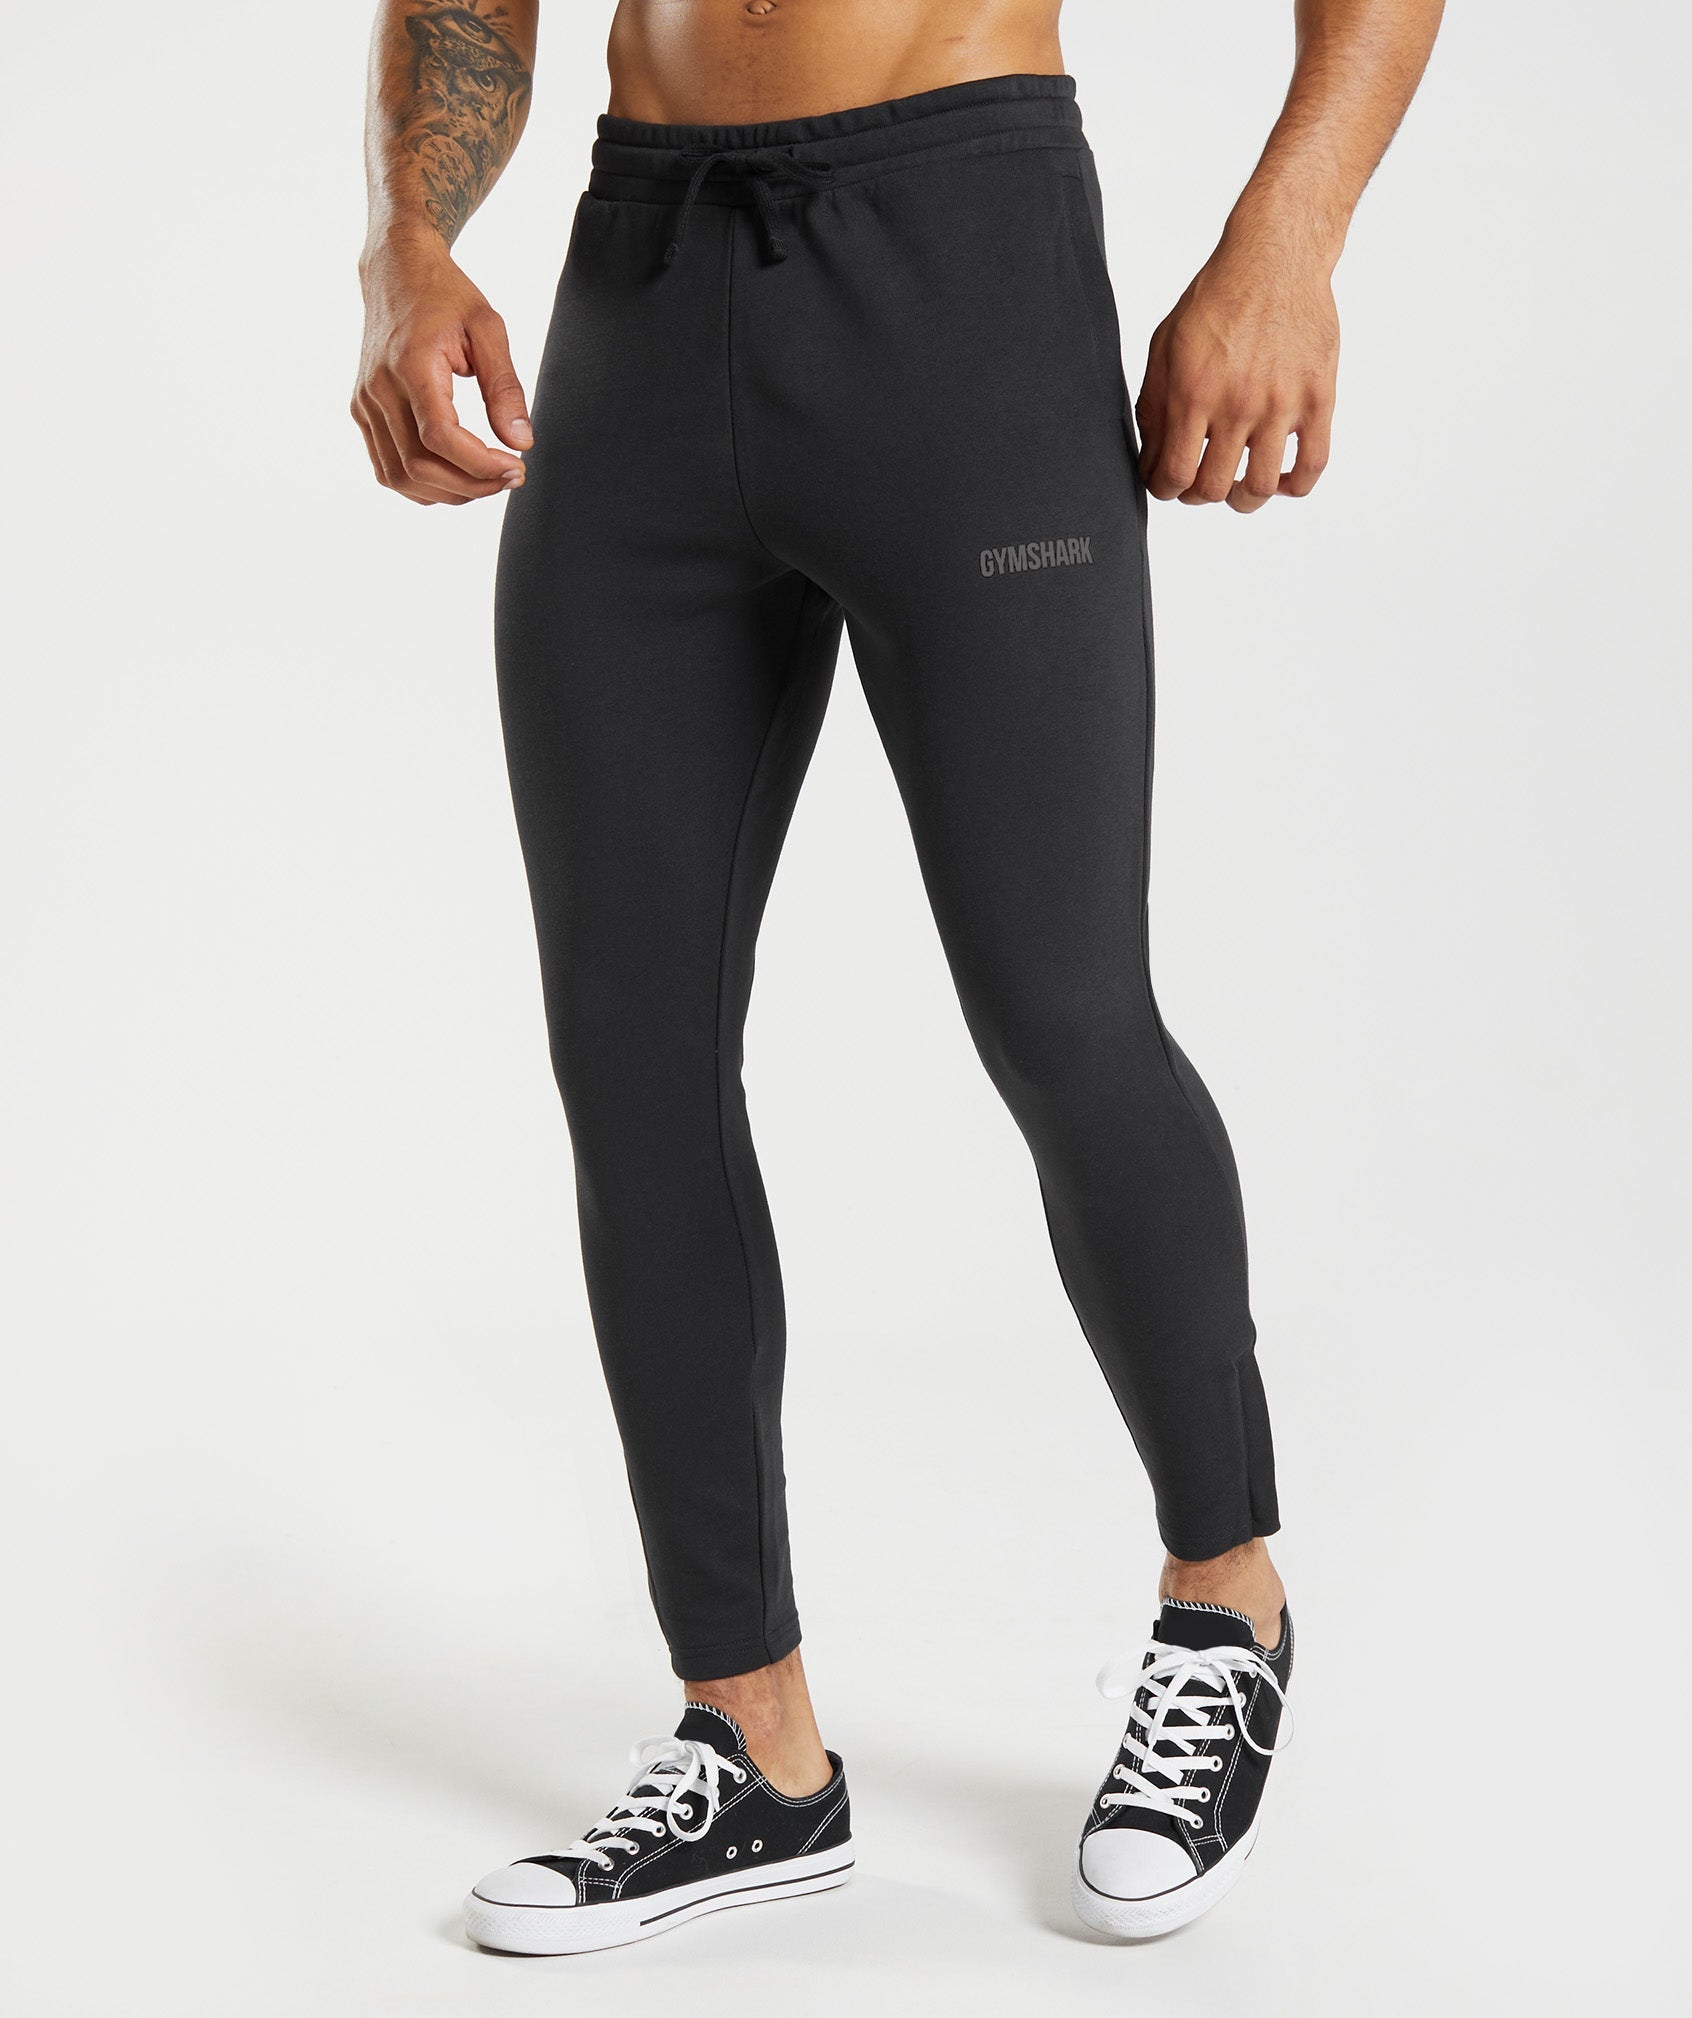 Apollo Muscle Fit Joggers in Black